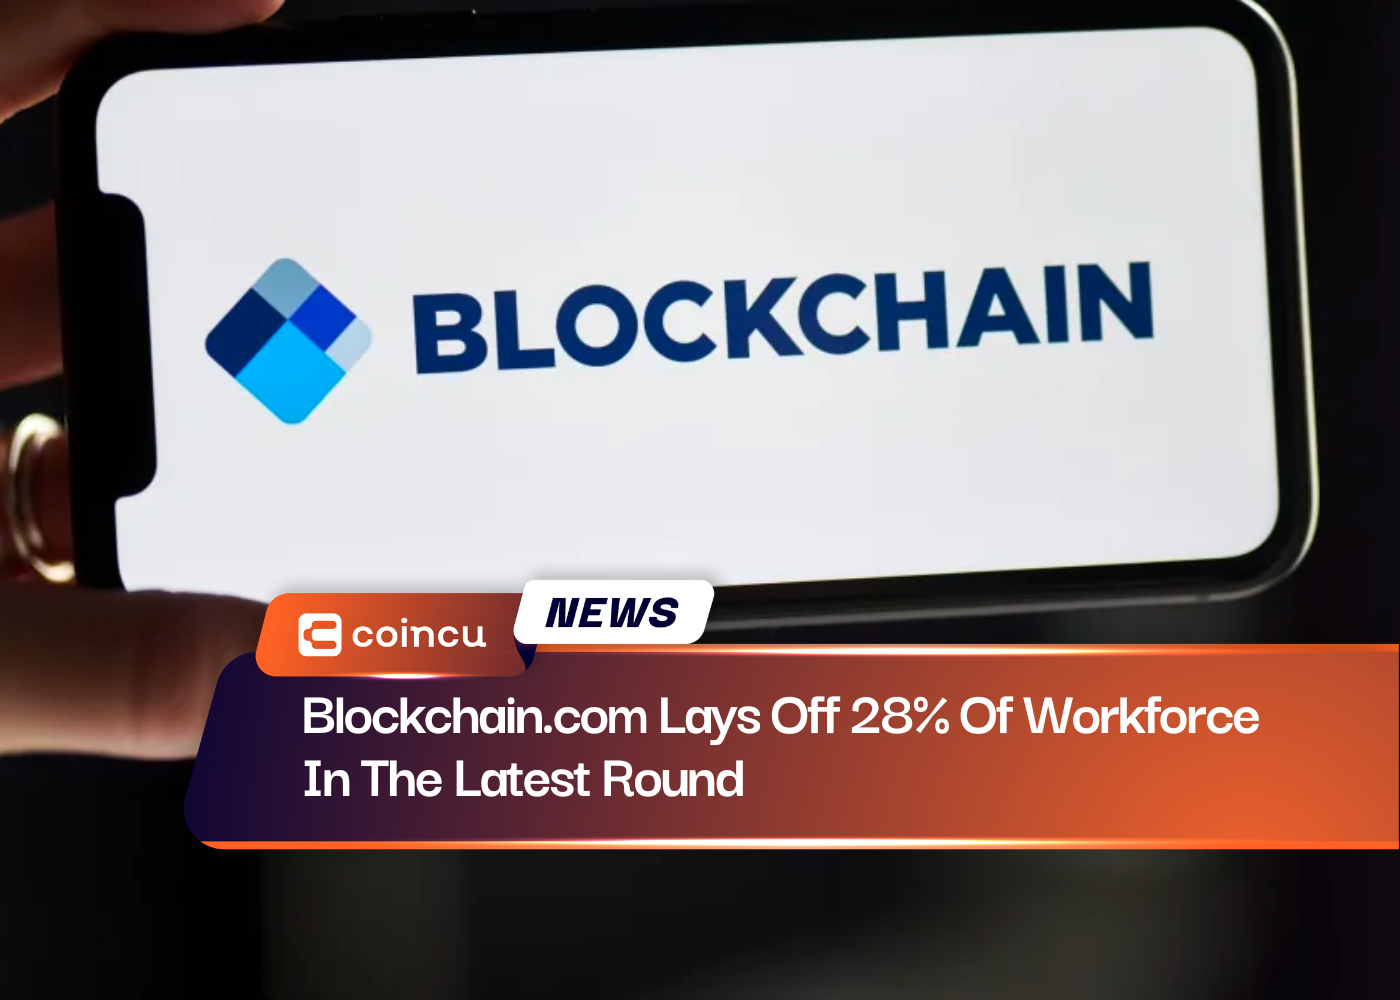 Blockchain.com Lays Off 28% Of Workforce In The Latest Round